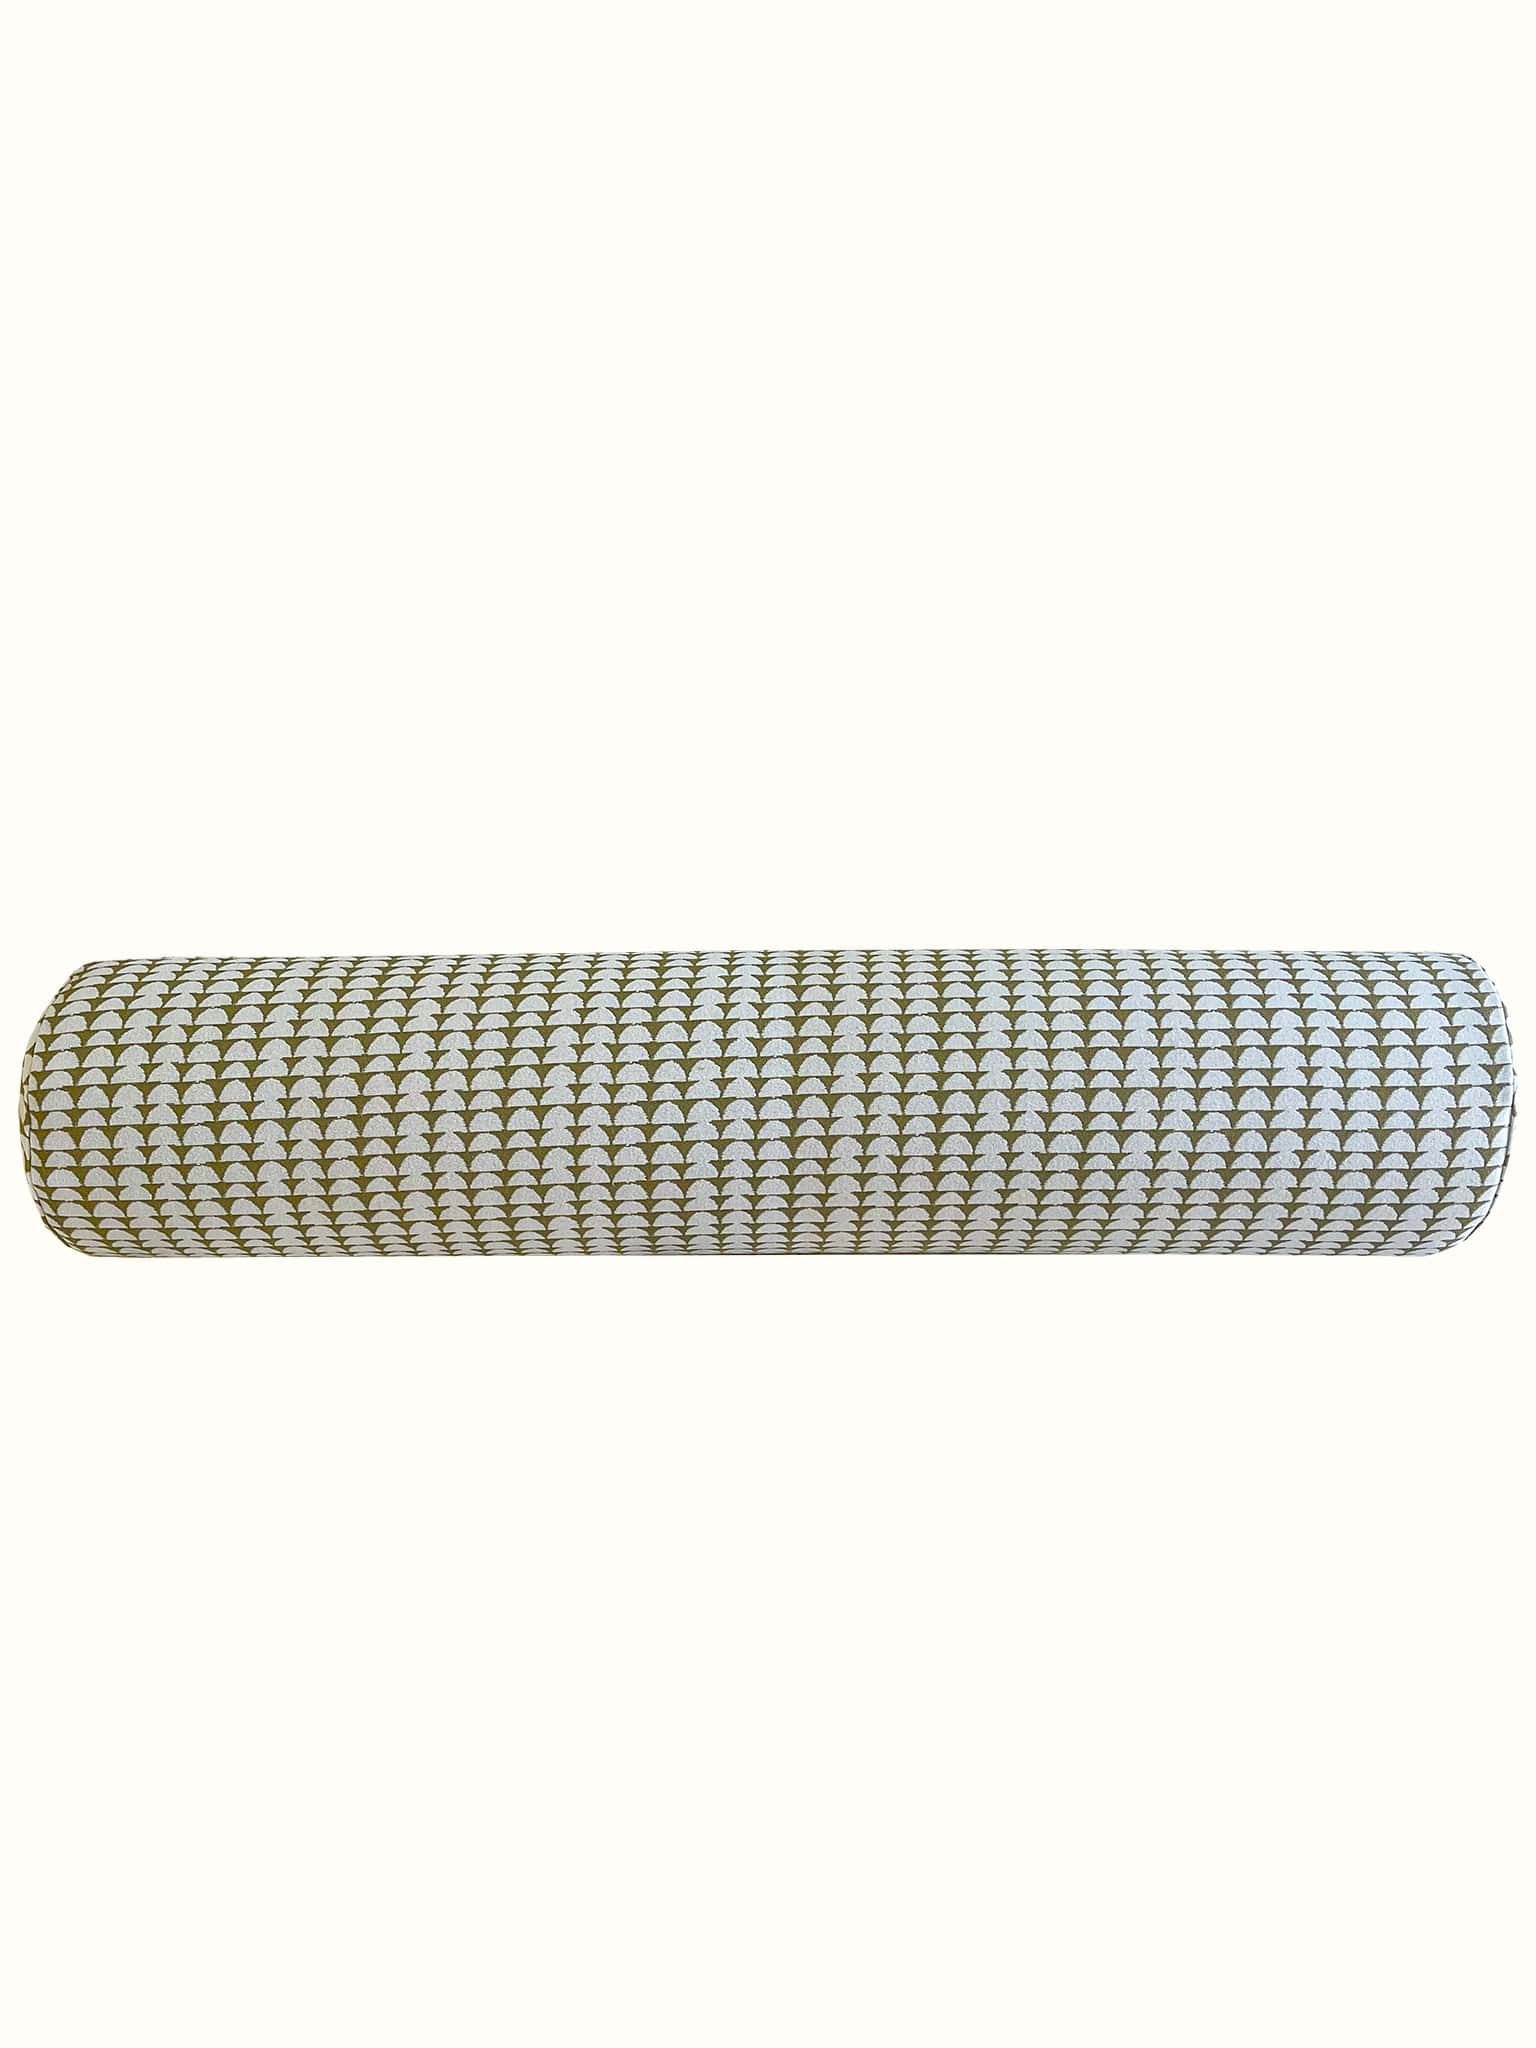 King sized bolster pillow with firm foam insert, designed in modern geometric pattern, in color olive yellow green.